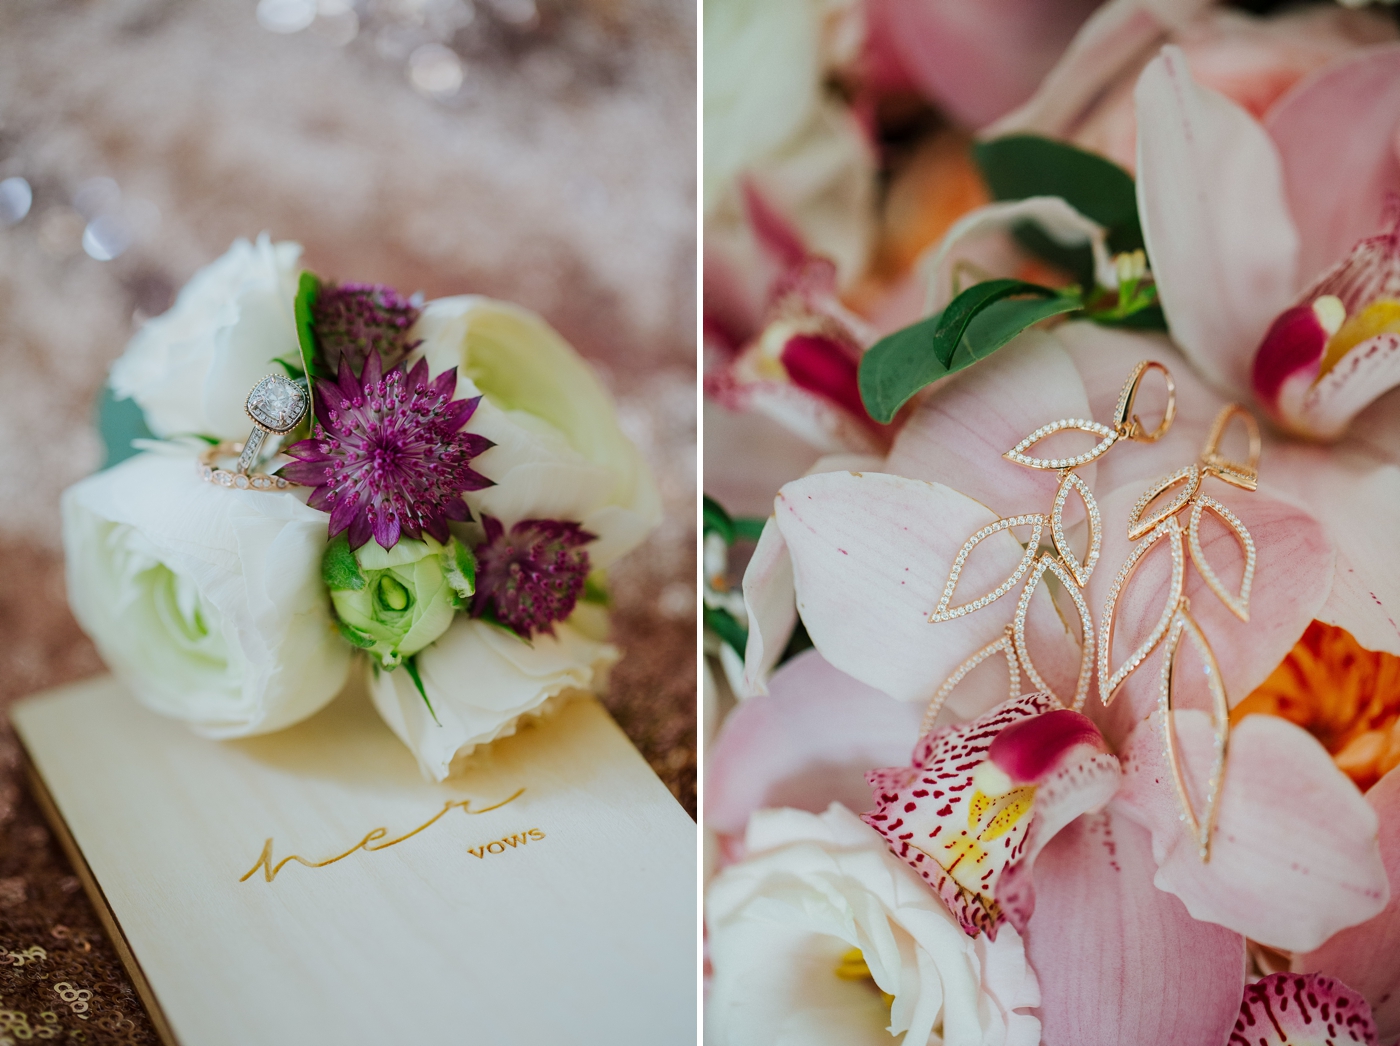 Spring Savannah Wedding with orchids and wisteria by Izzy Hudgins Photography